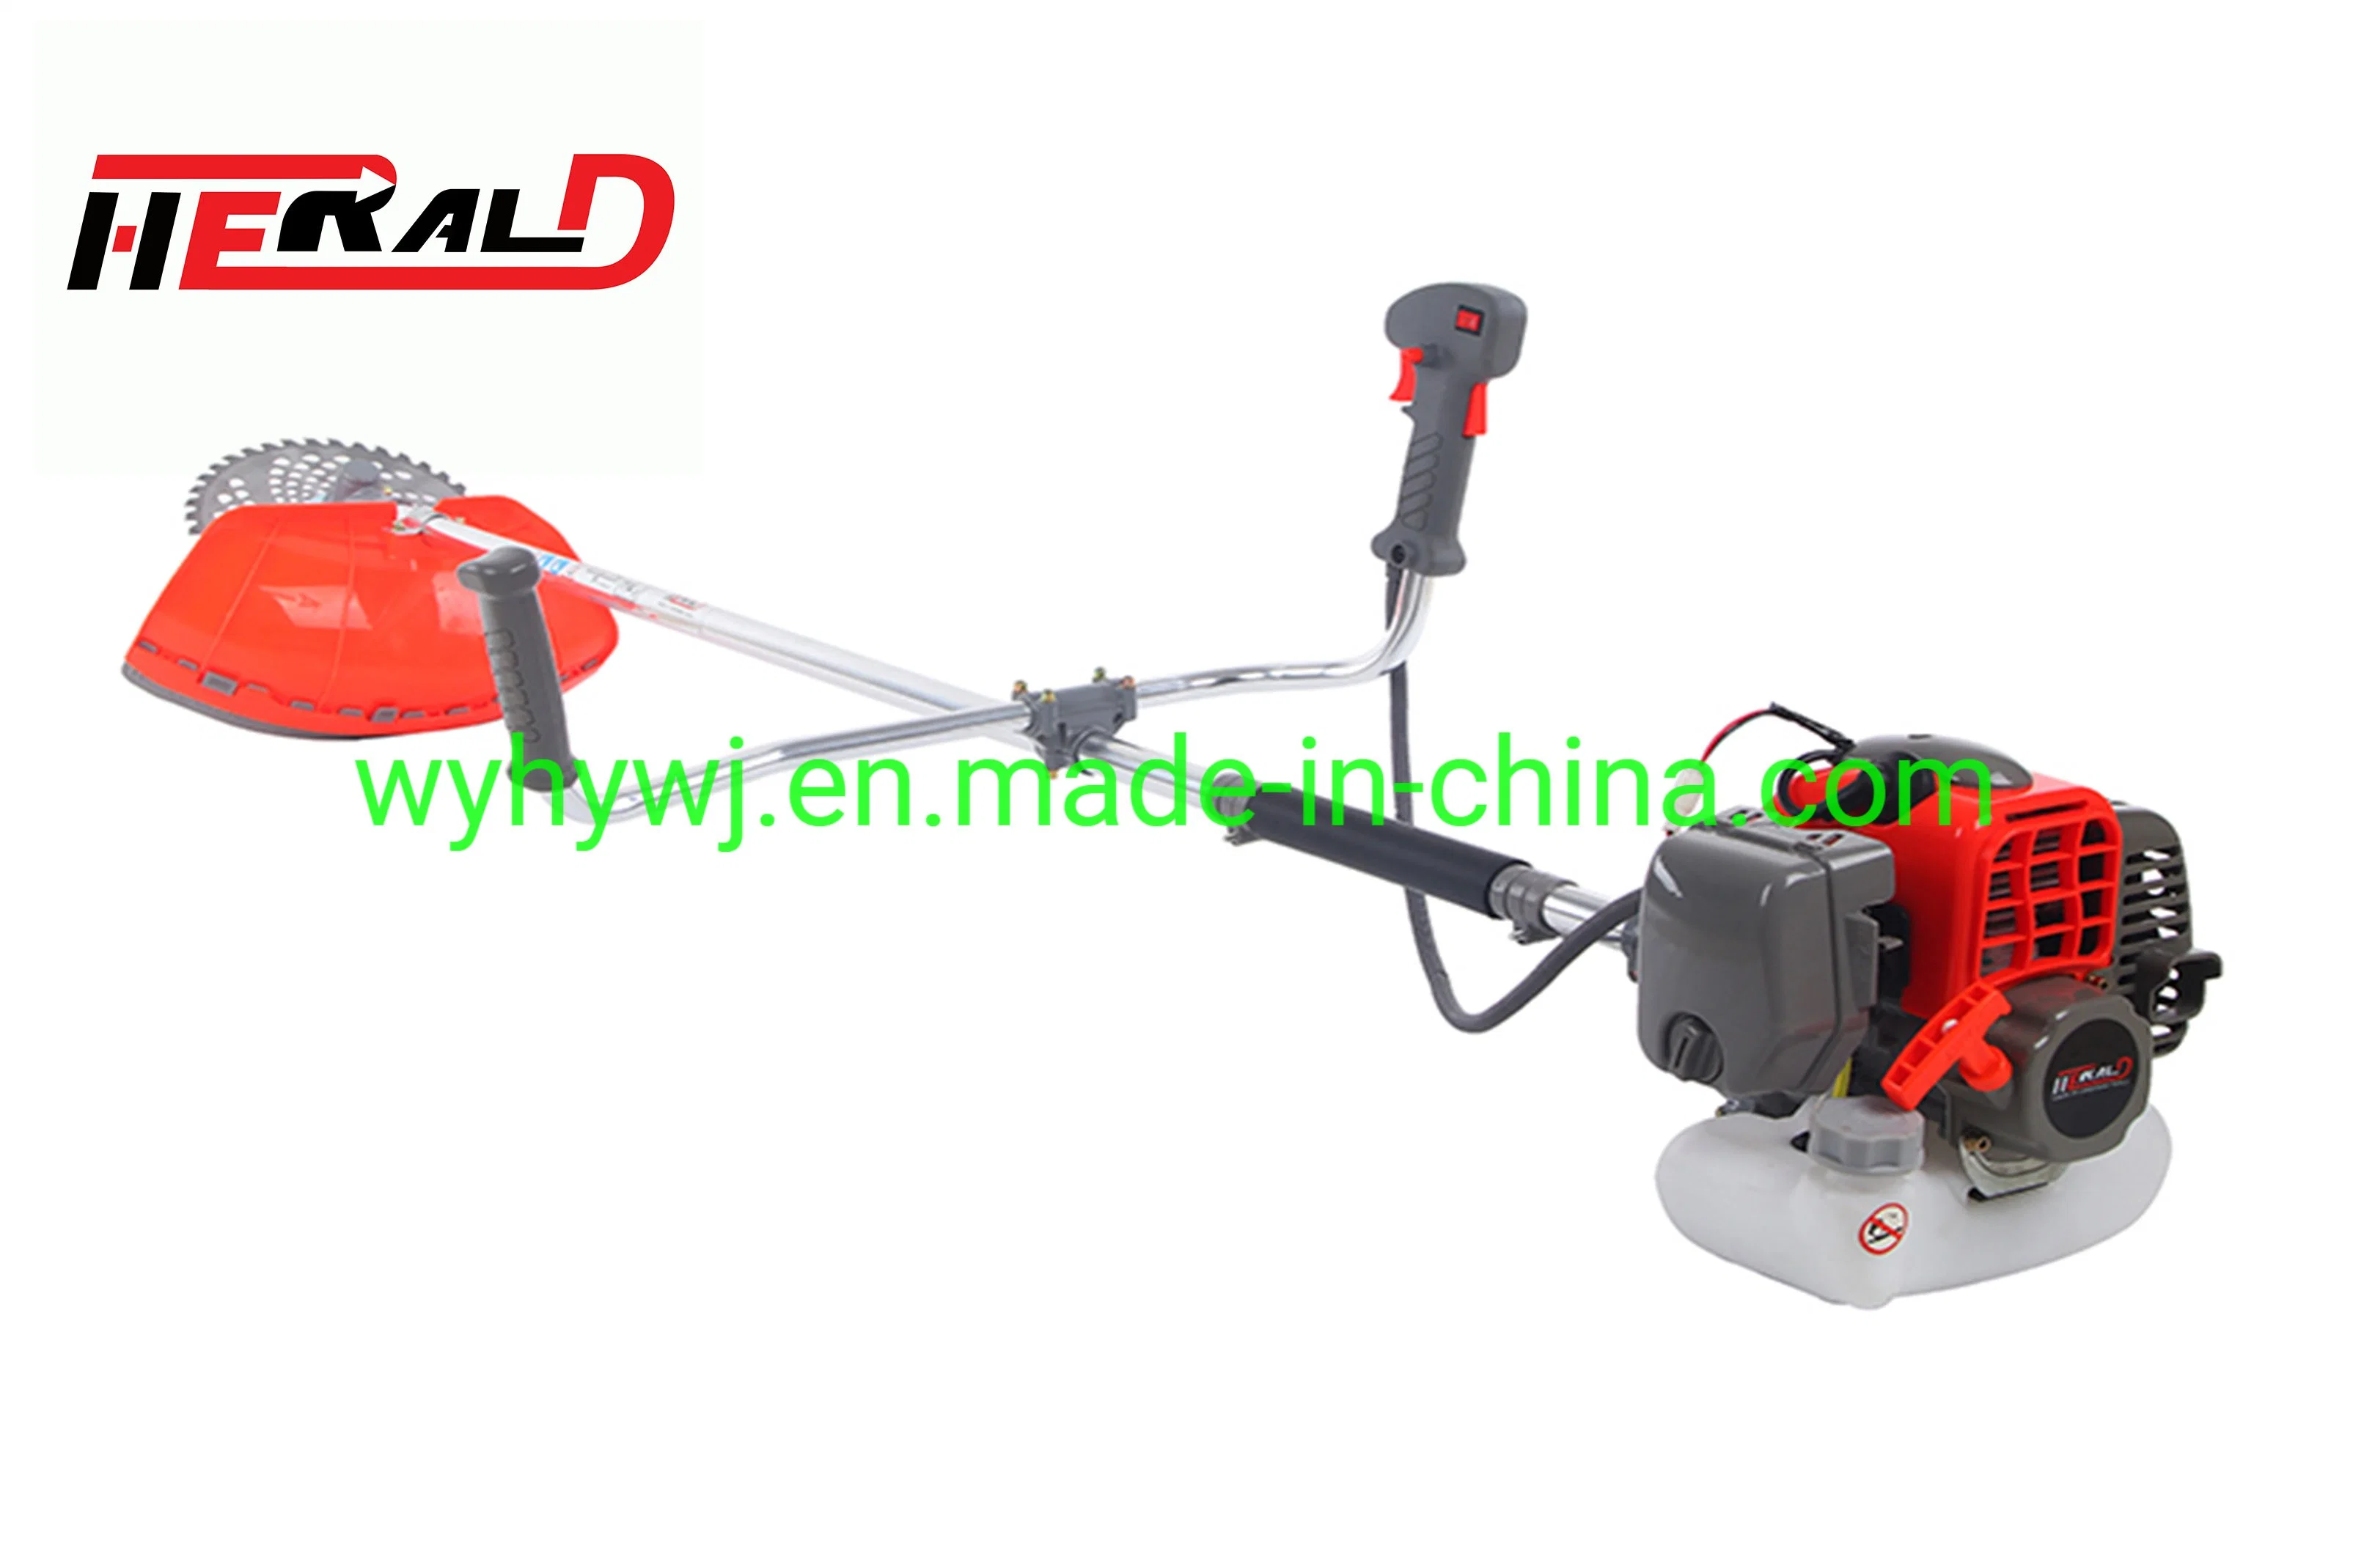 Popular Powerful Gasoline Trimmer Hy-415CT Garden Tool Petrol Brush Cutter with Alloy Blade